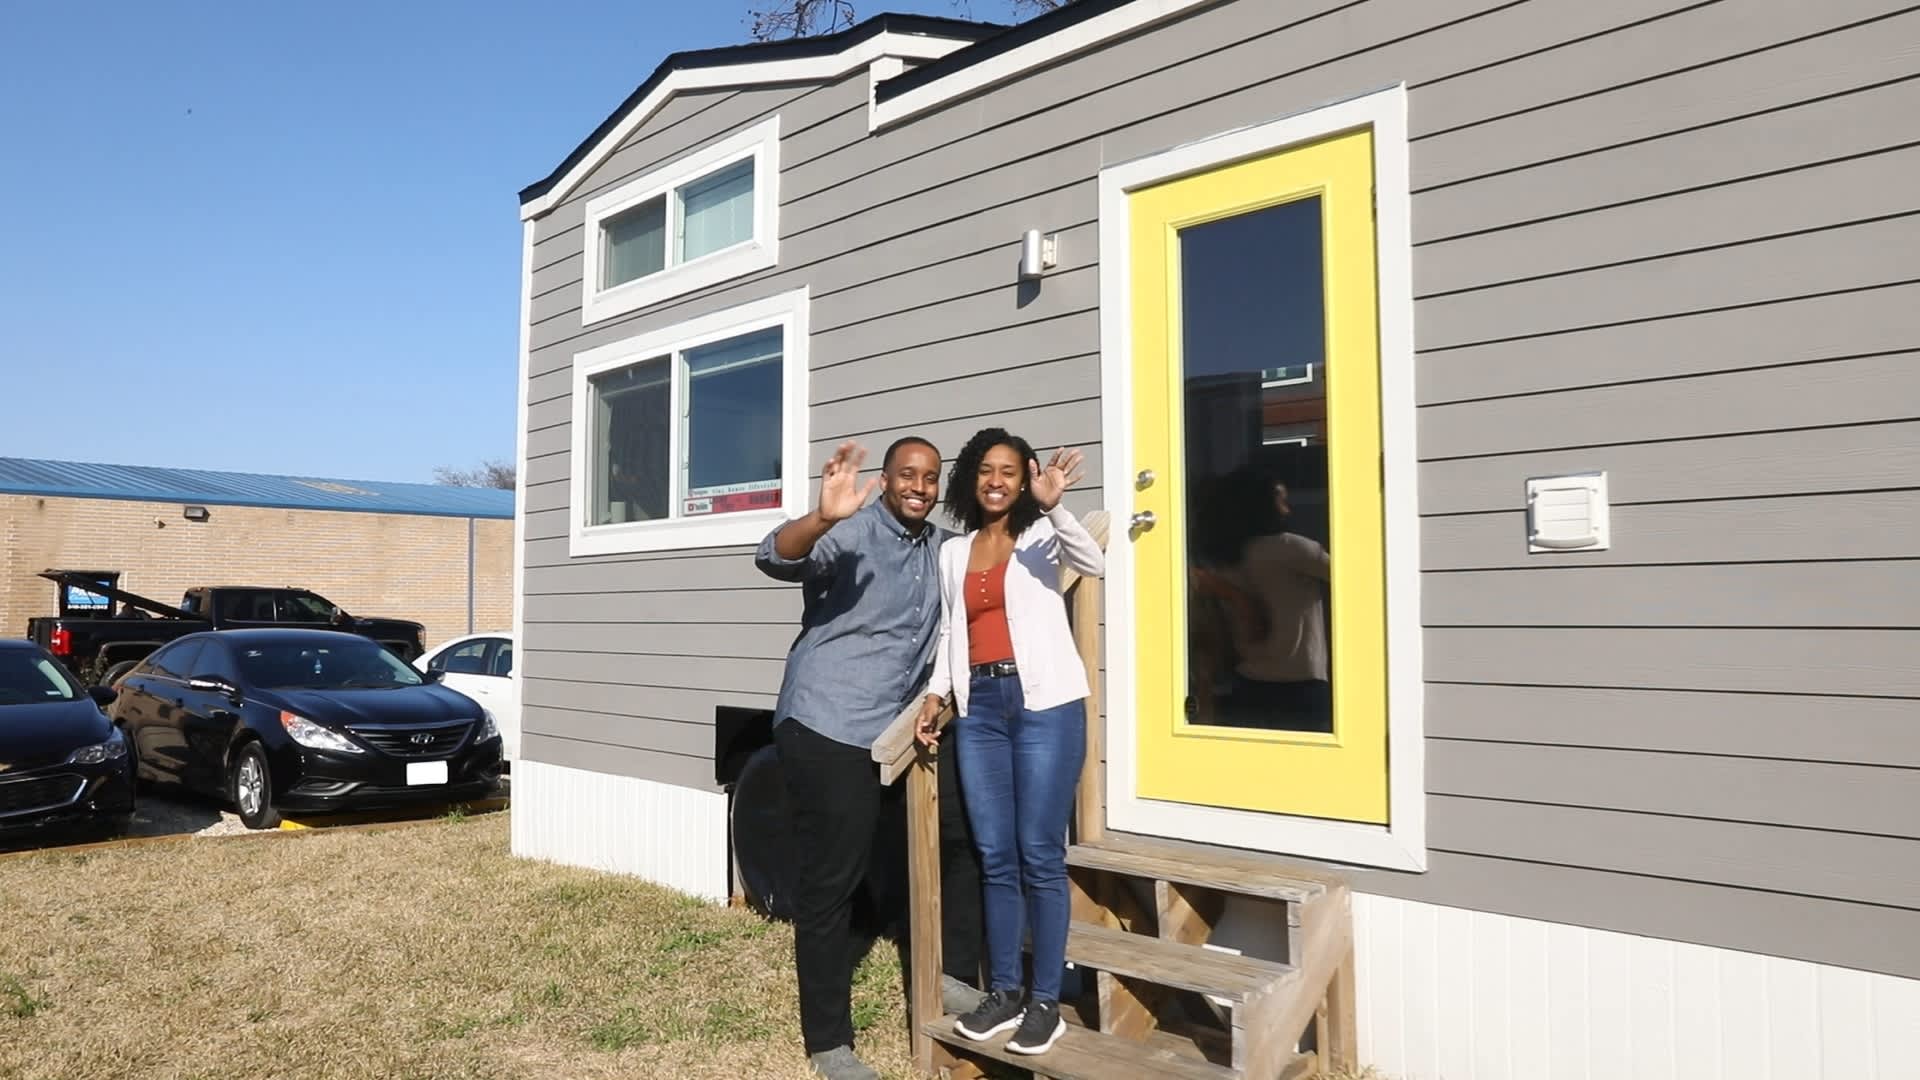 Marek and Kothney-Issa in January 2020 in front of their home in Lake Dallas, Texas. The couple live in a tiny home community.